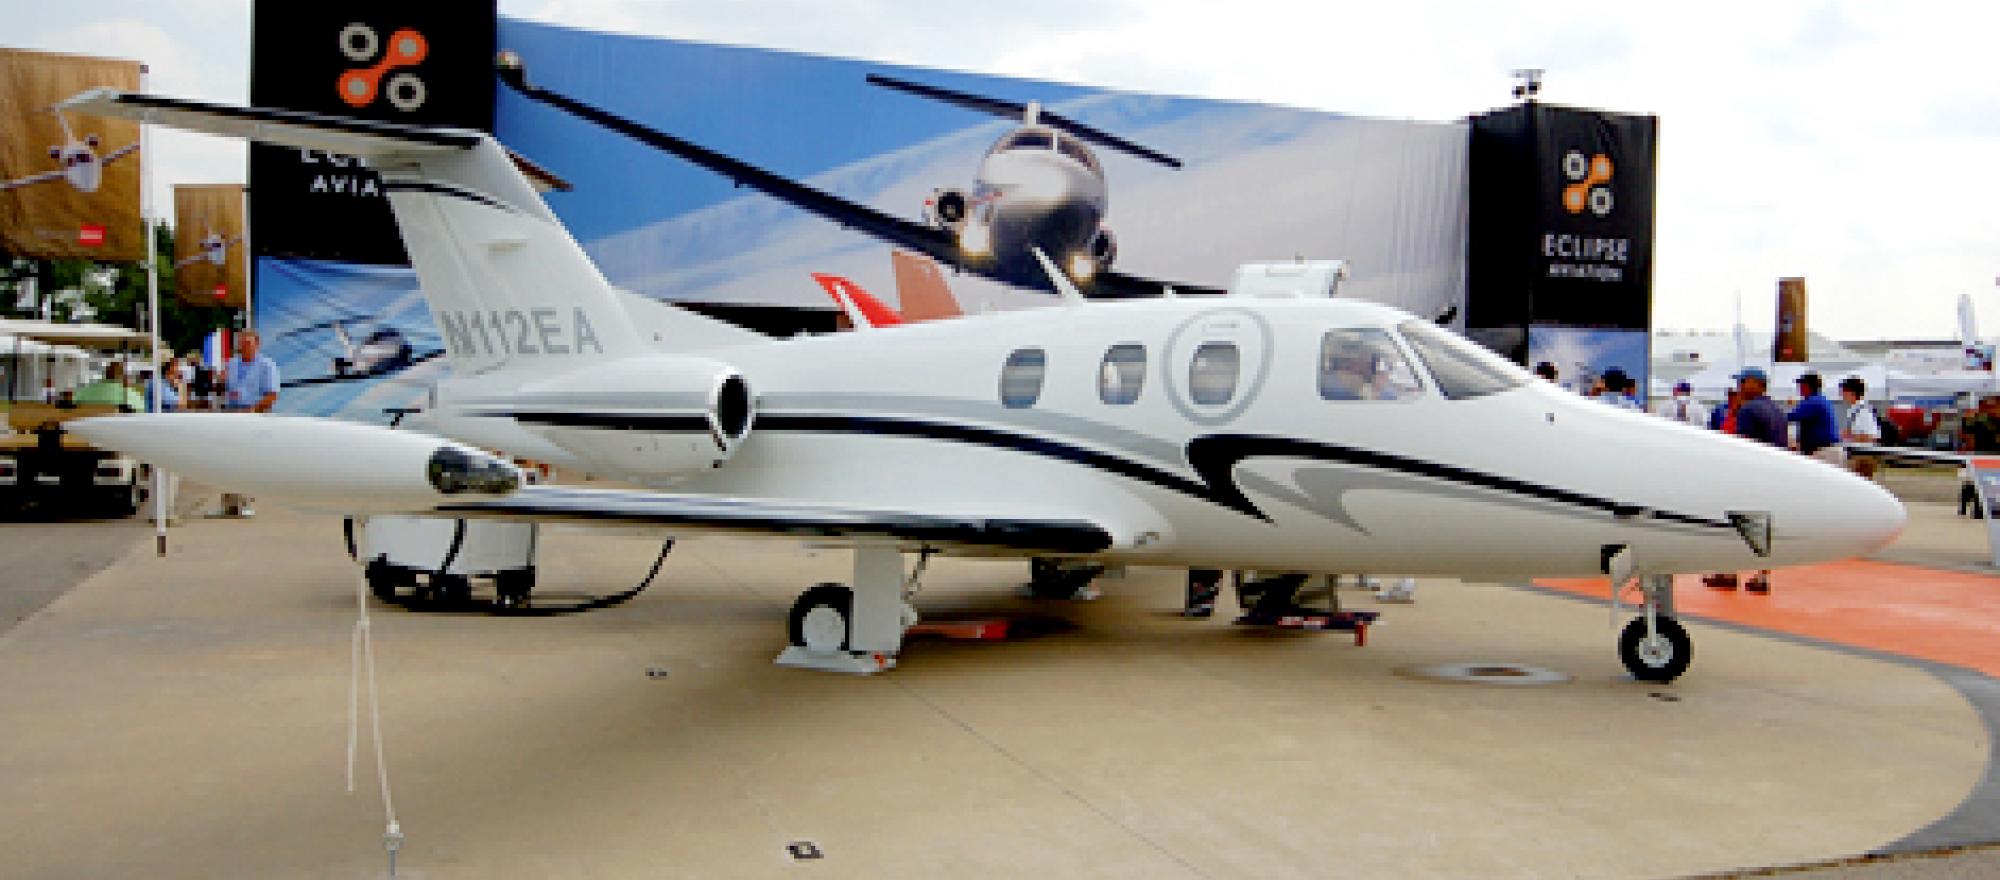 Going once, going twice...sold! An Eclipse 500 very light jet was sold to hig